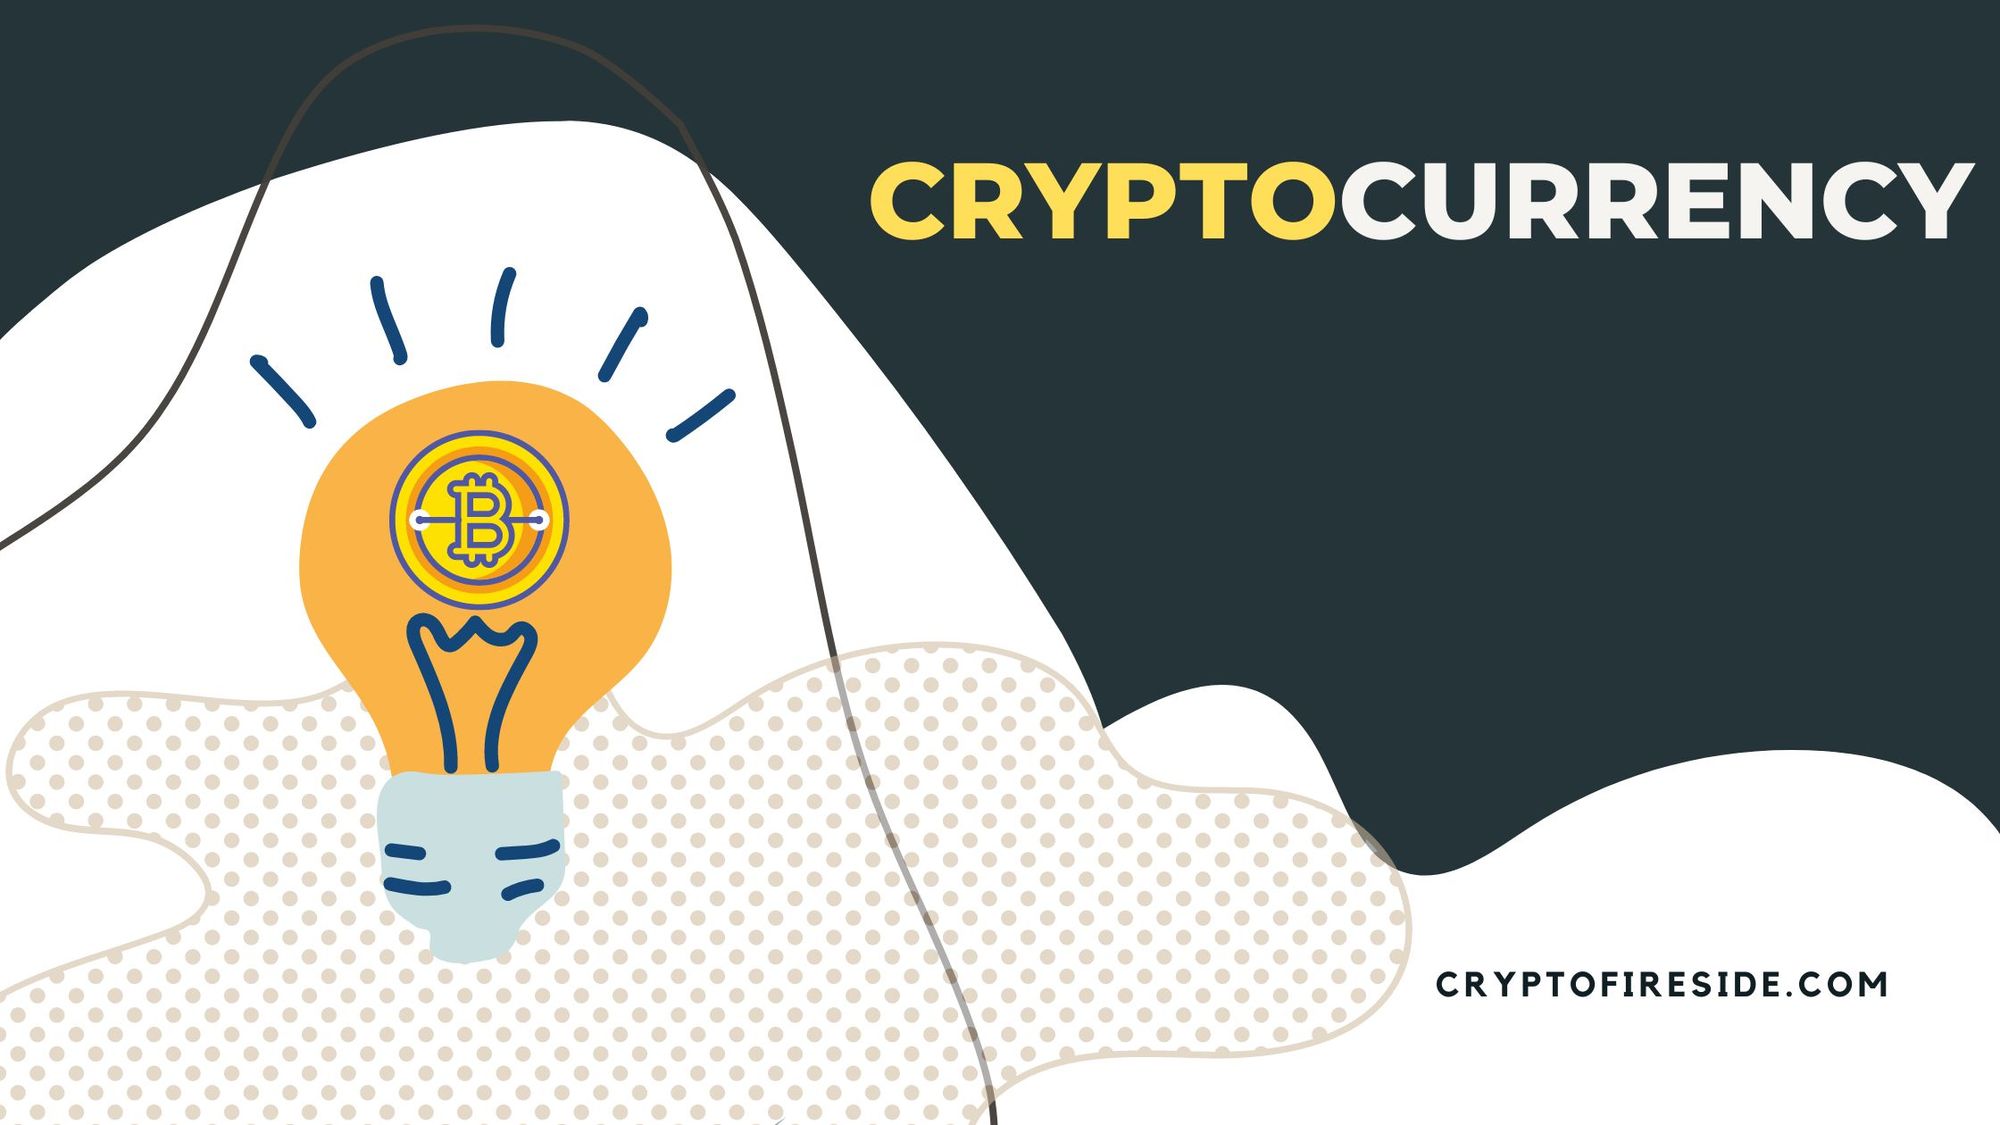 How does crypto work?